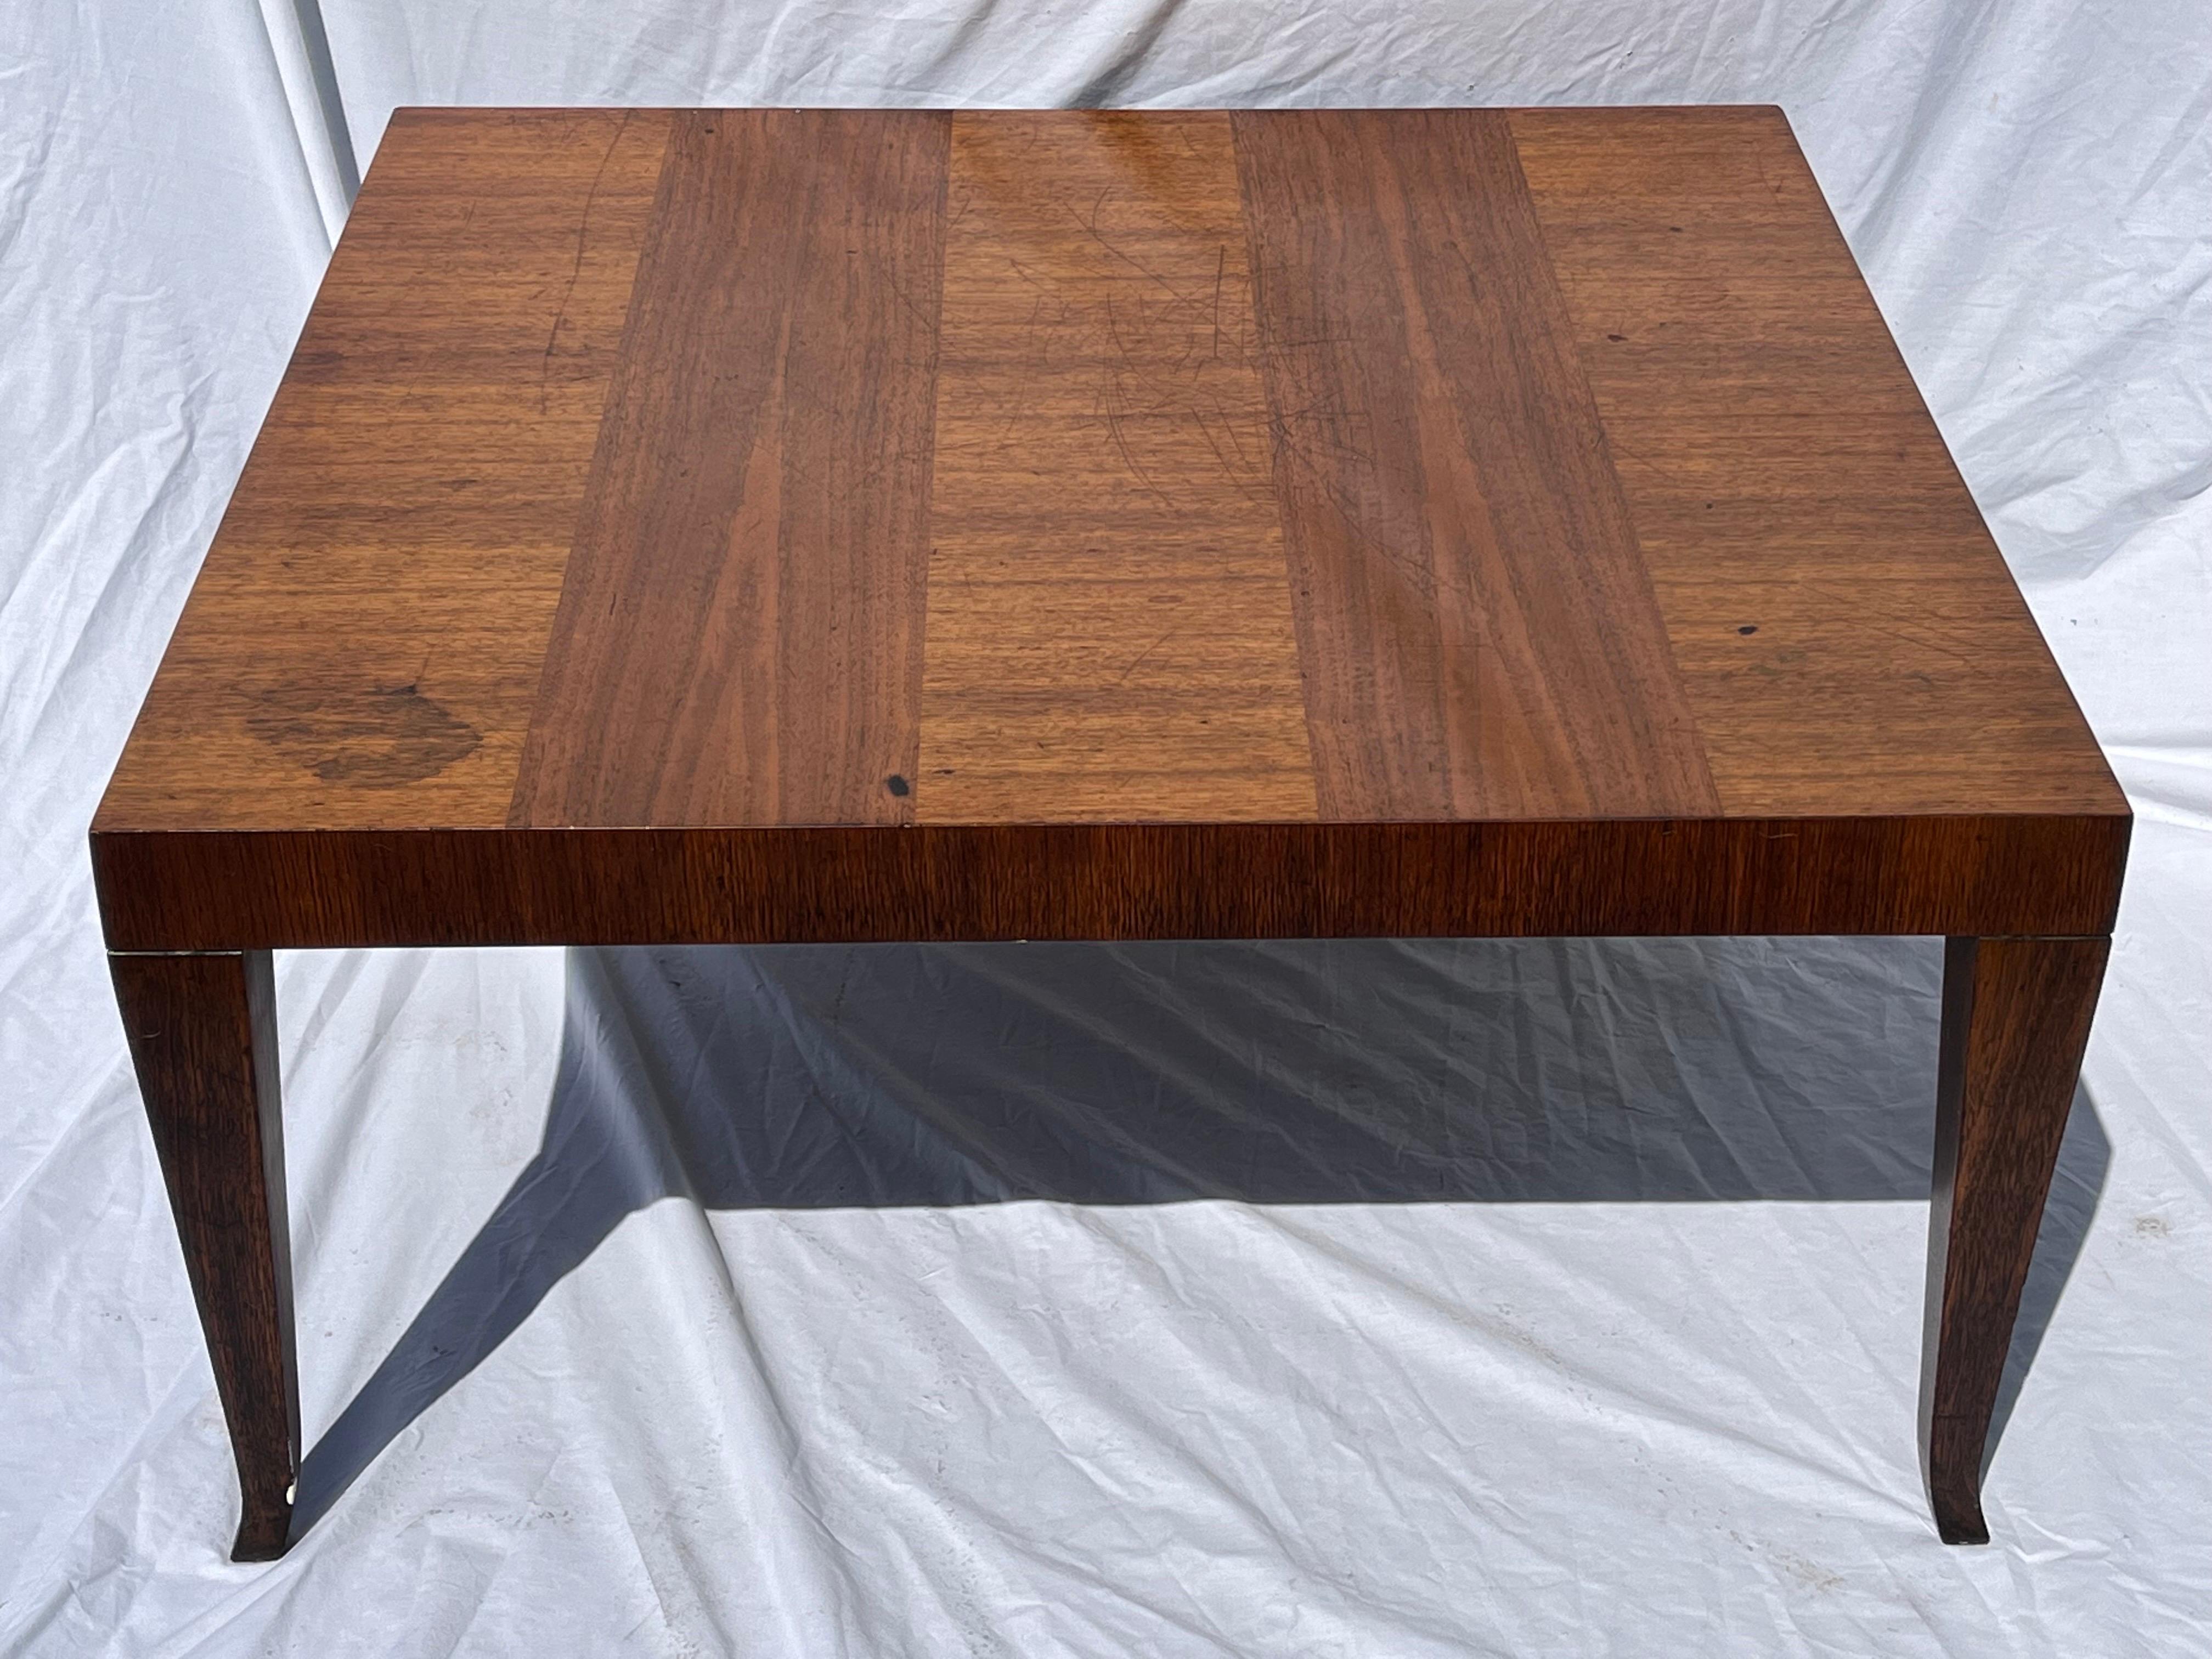 T.H. Robsjohn-Gibbings for Widdicomb Mid-Century Modern 1950s Low Coffee Table In Distressed Condition For Sale In Atlanta, GA